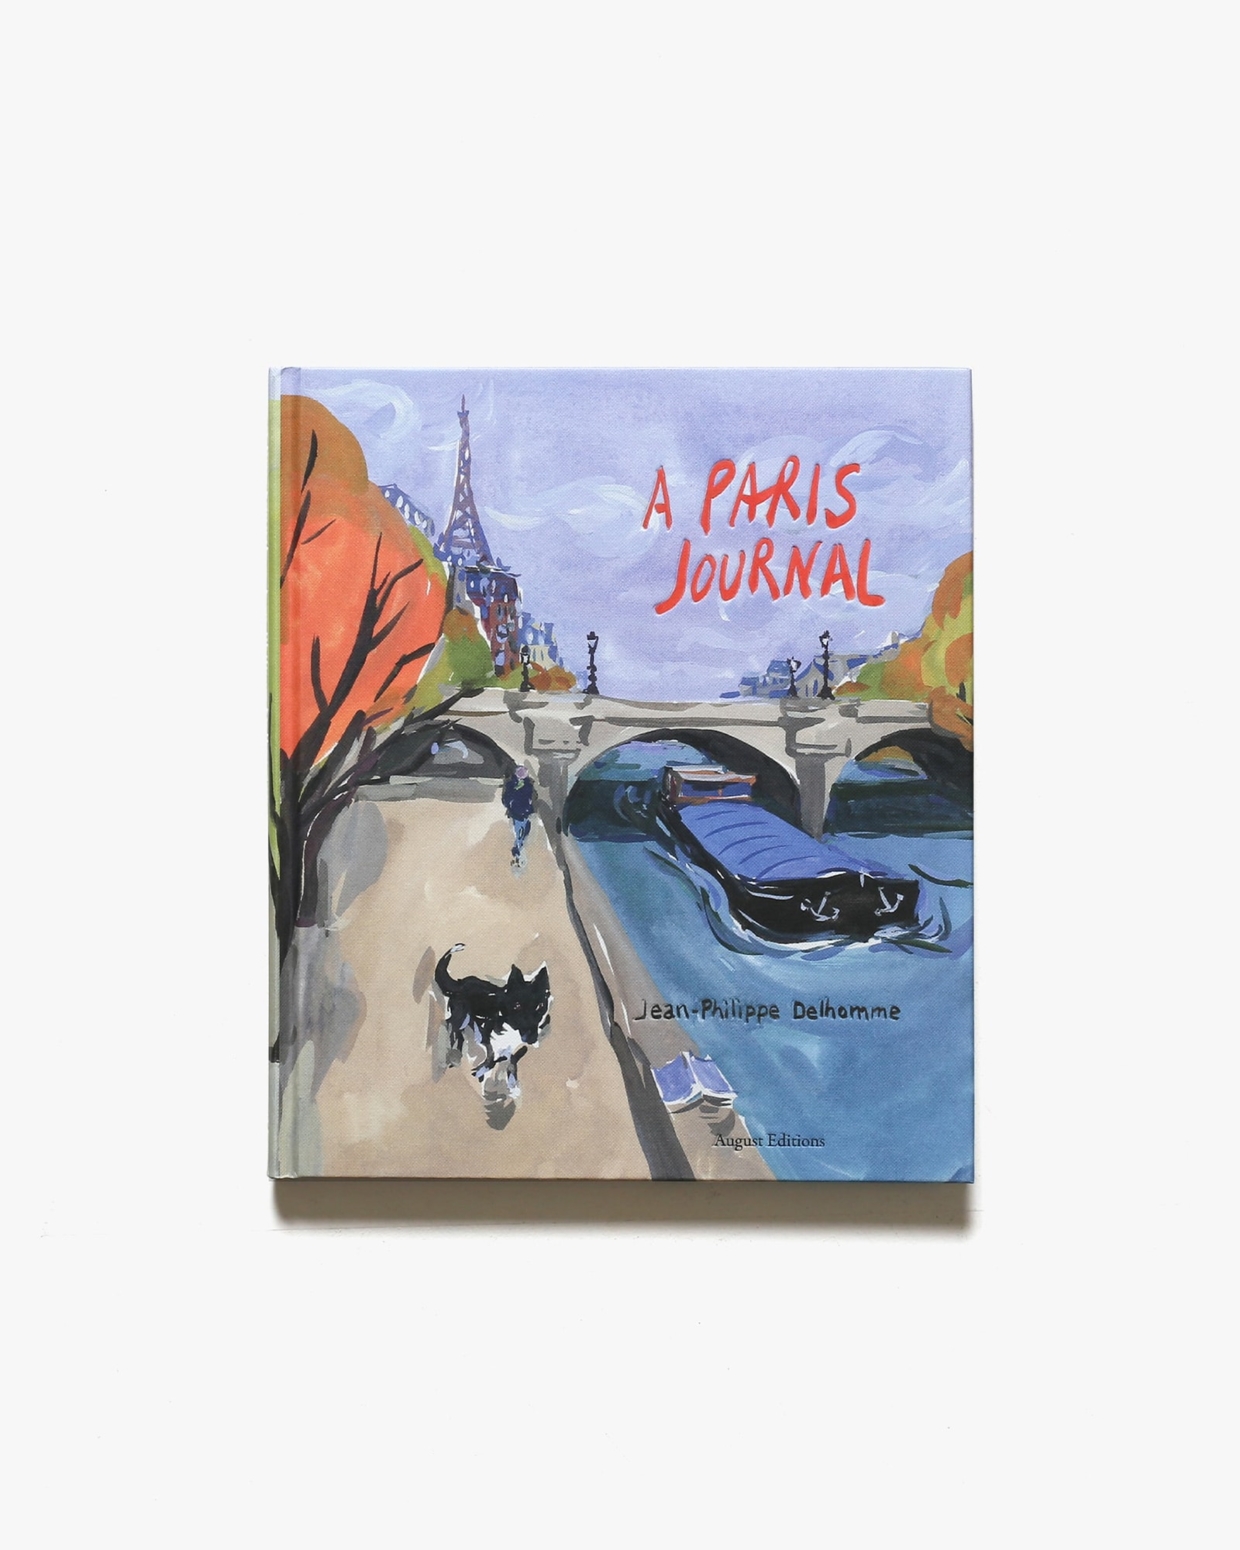 A Paris Journal | Jean-Philippe Delhomme ジャン＝フィリップ・デローム